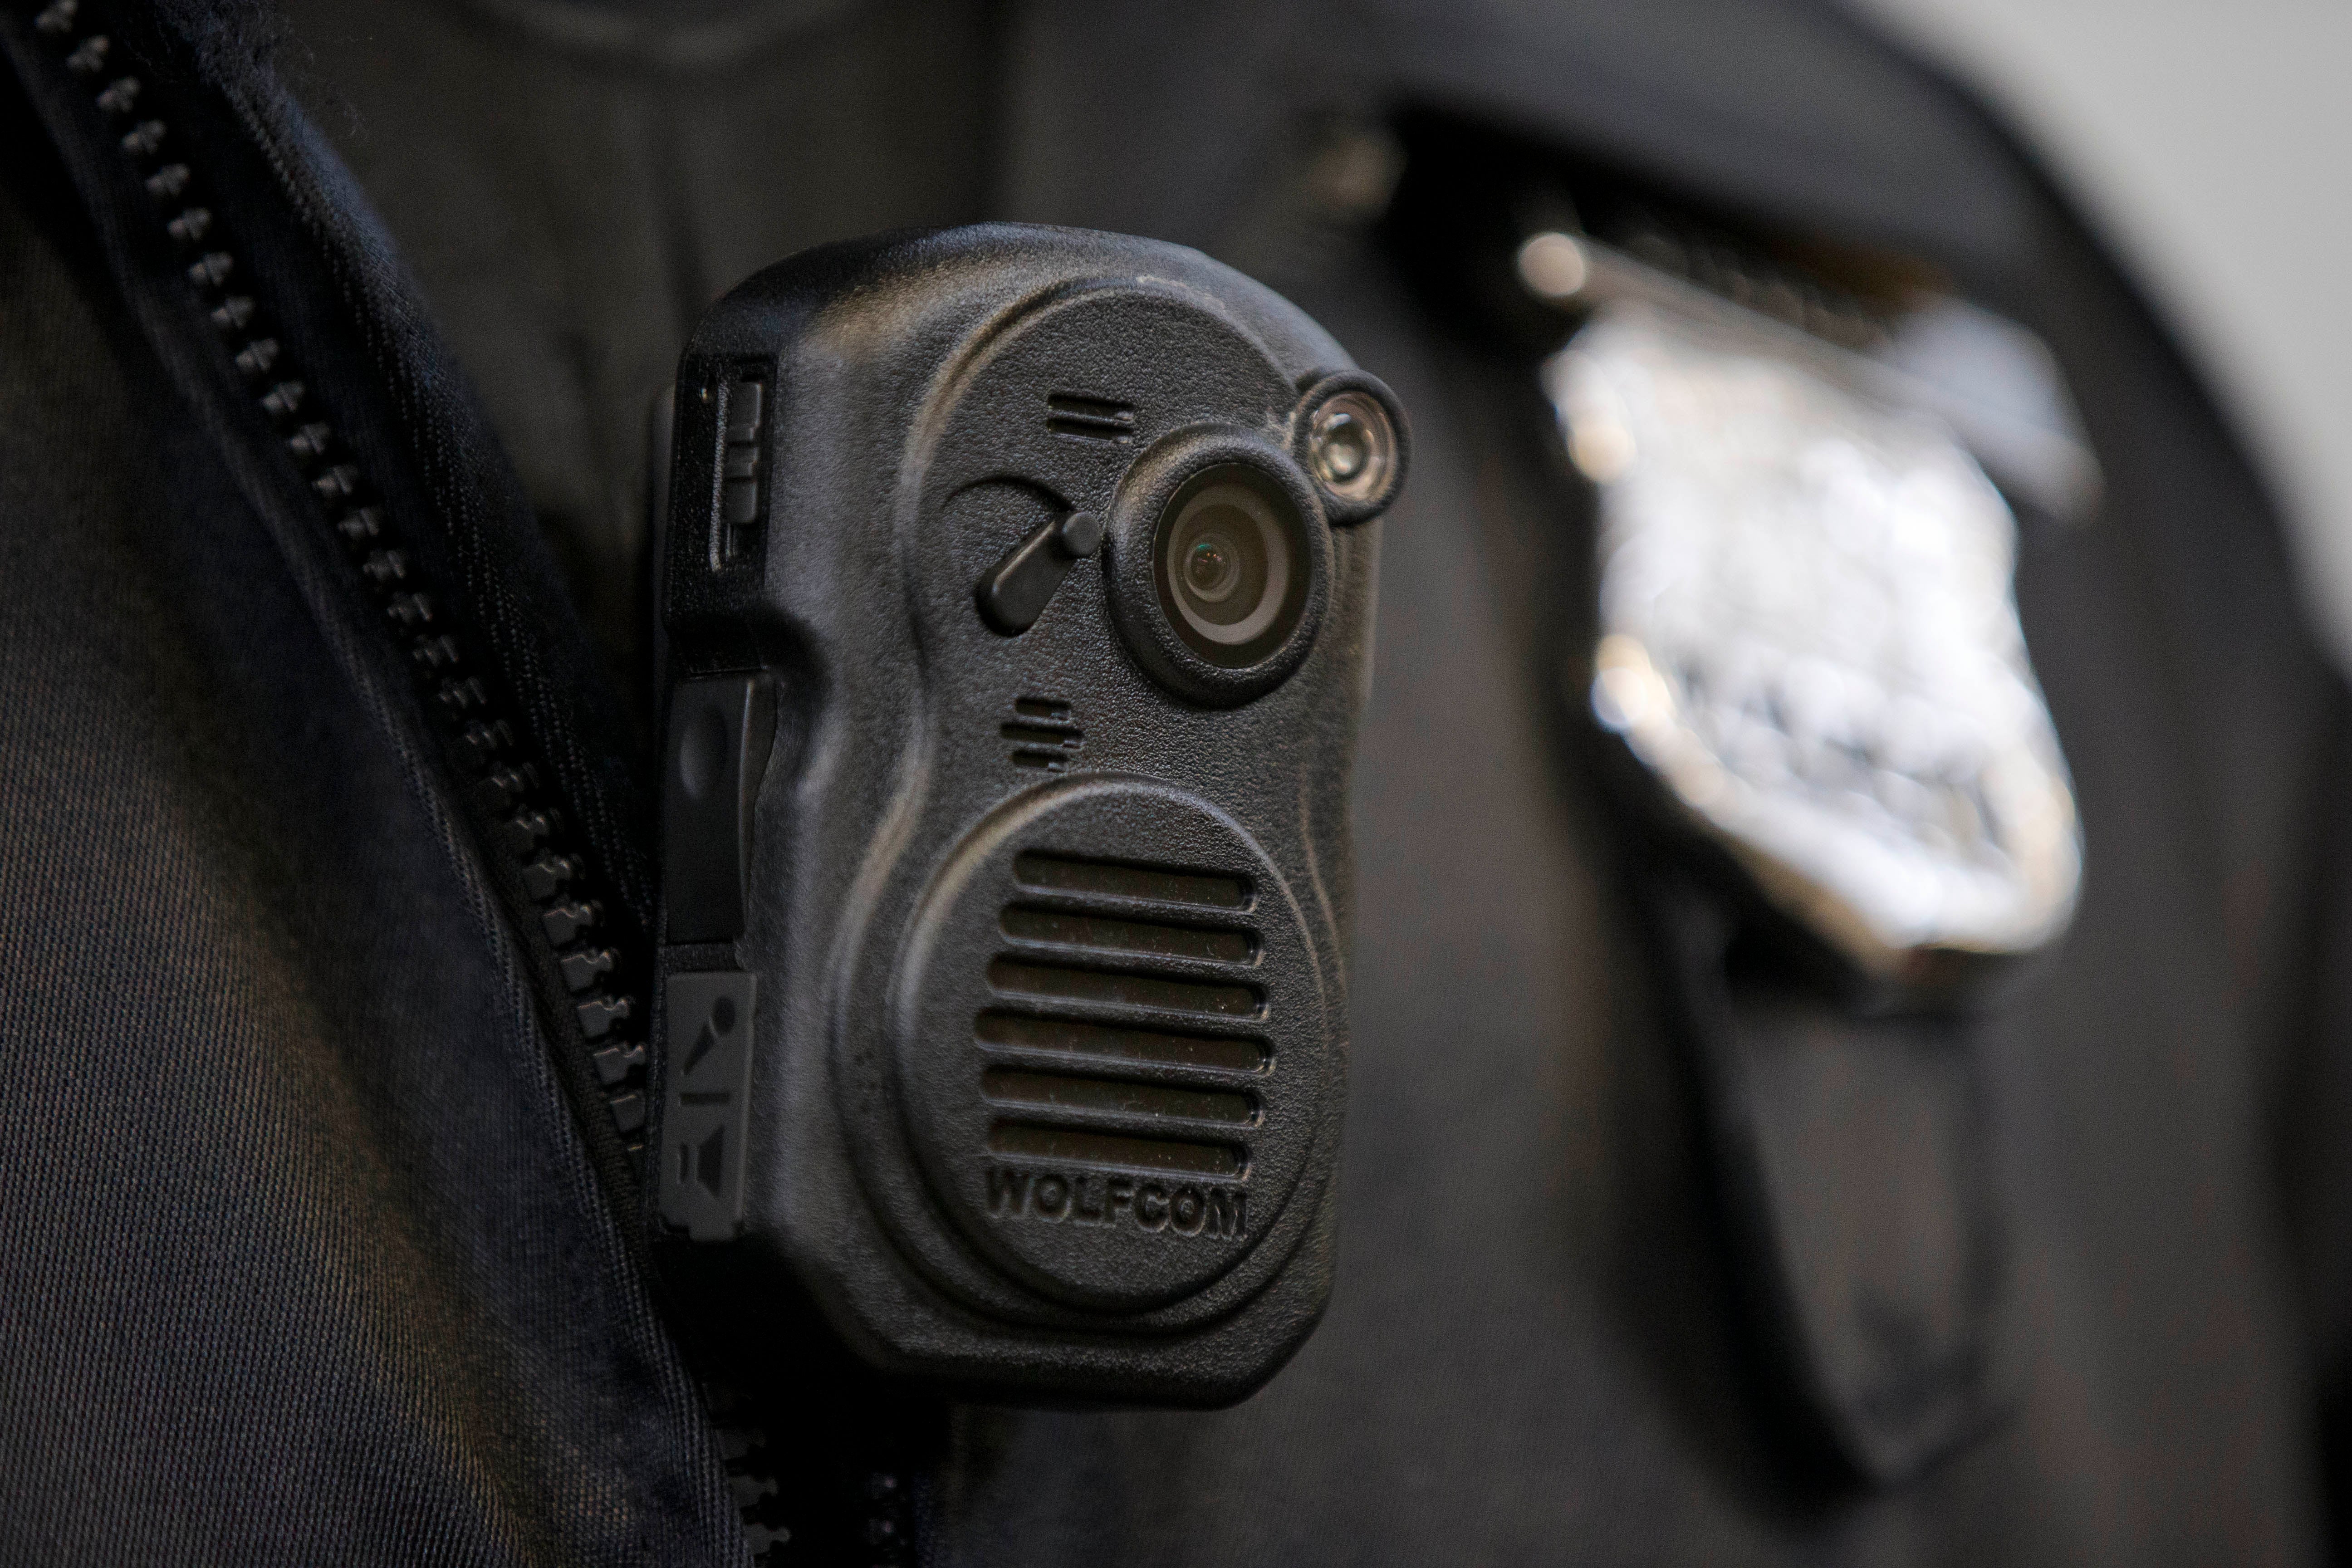 Meet the first U.S. police department to deploy body cameras